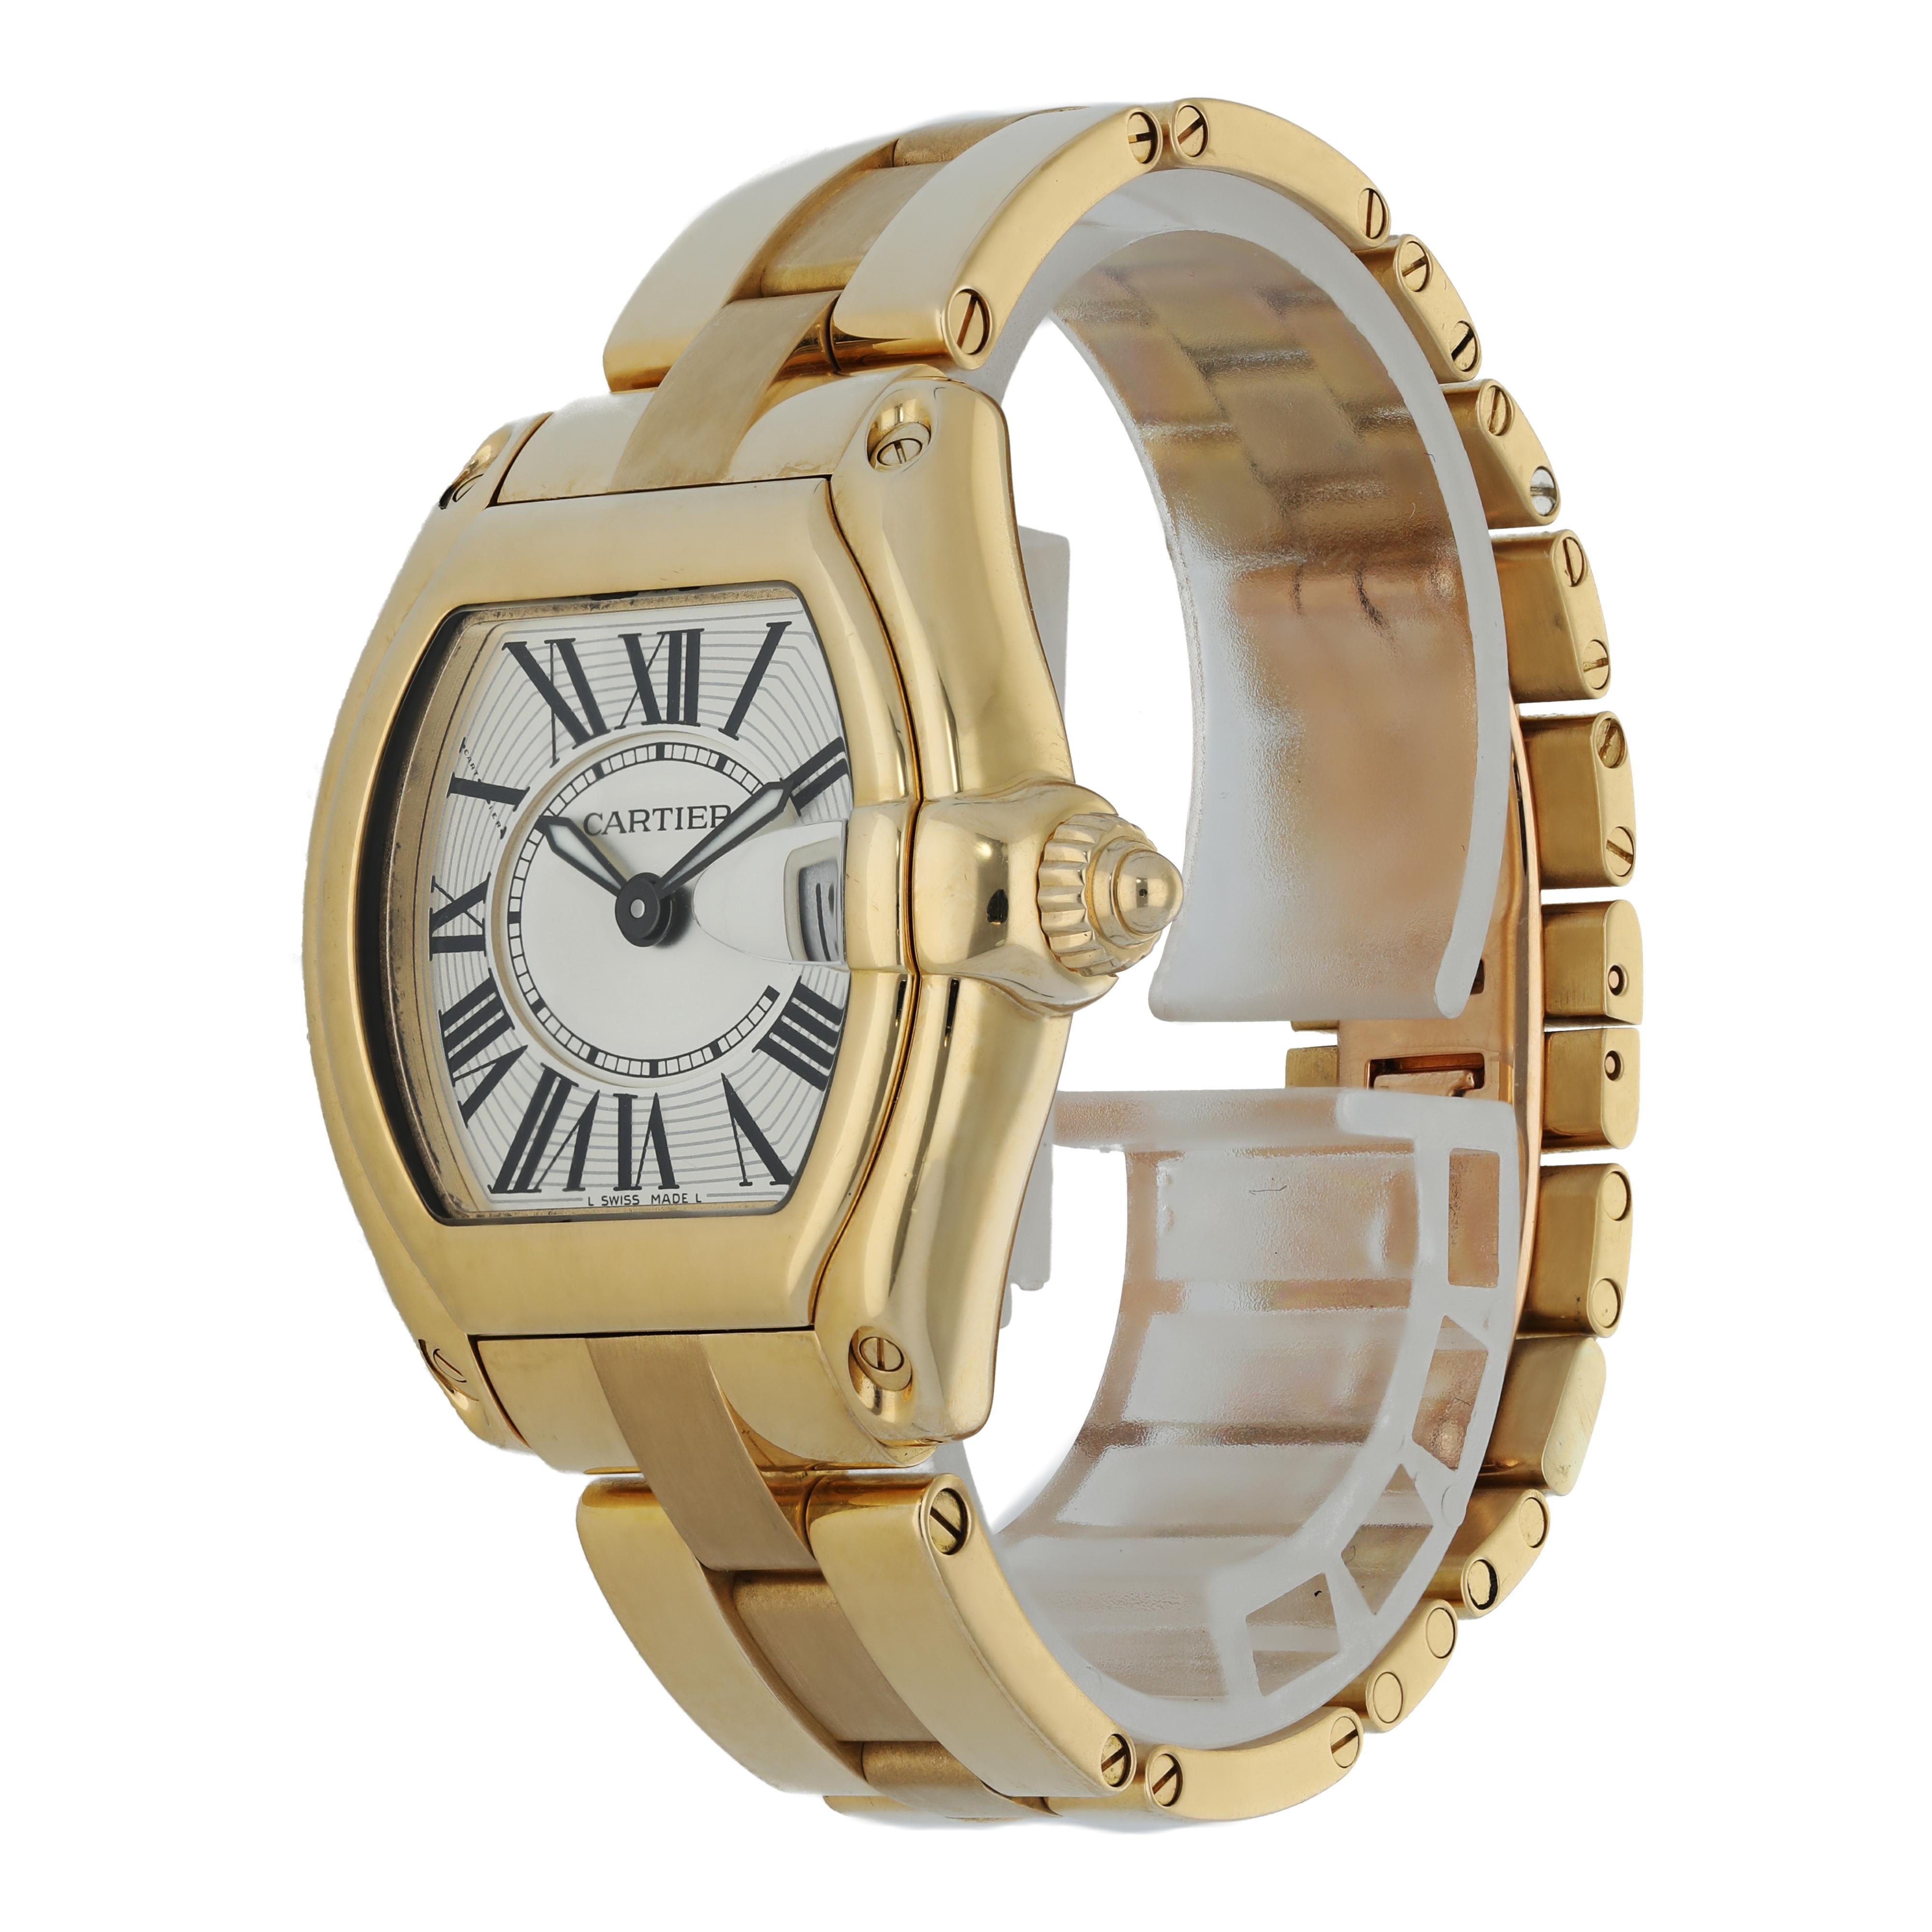 Cartier Roadster 2676 Yellow Gold Ladies Watch.
30mm 18k Yellow gold case. 
Yellow Gold Stationary bezel. 
Silver dial with Luminous hands and black Roman numeral hour markers. 
Minute markers on the inner dial. 
Date display at the 3 o'clock